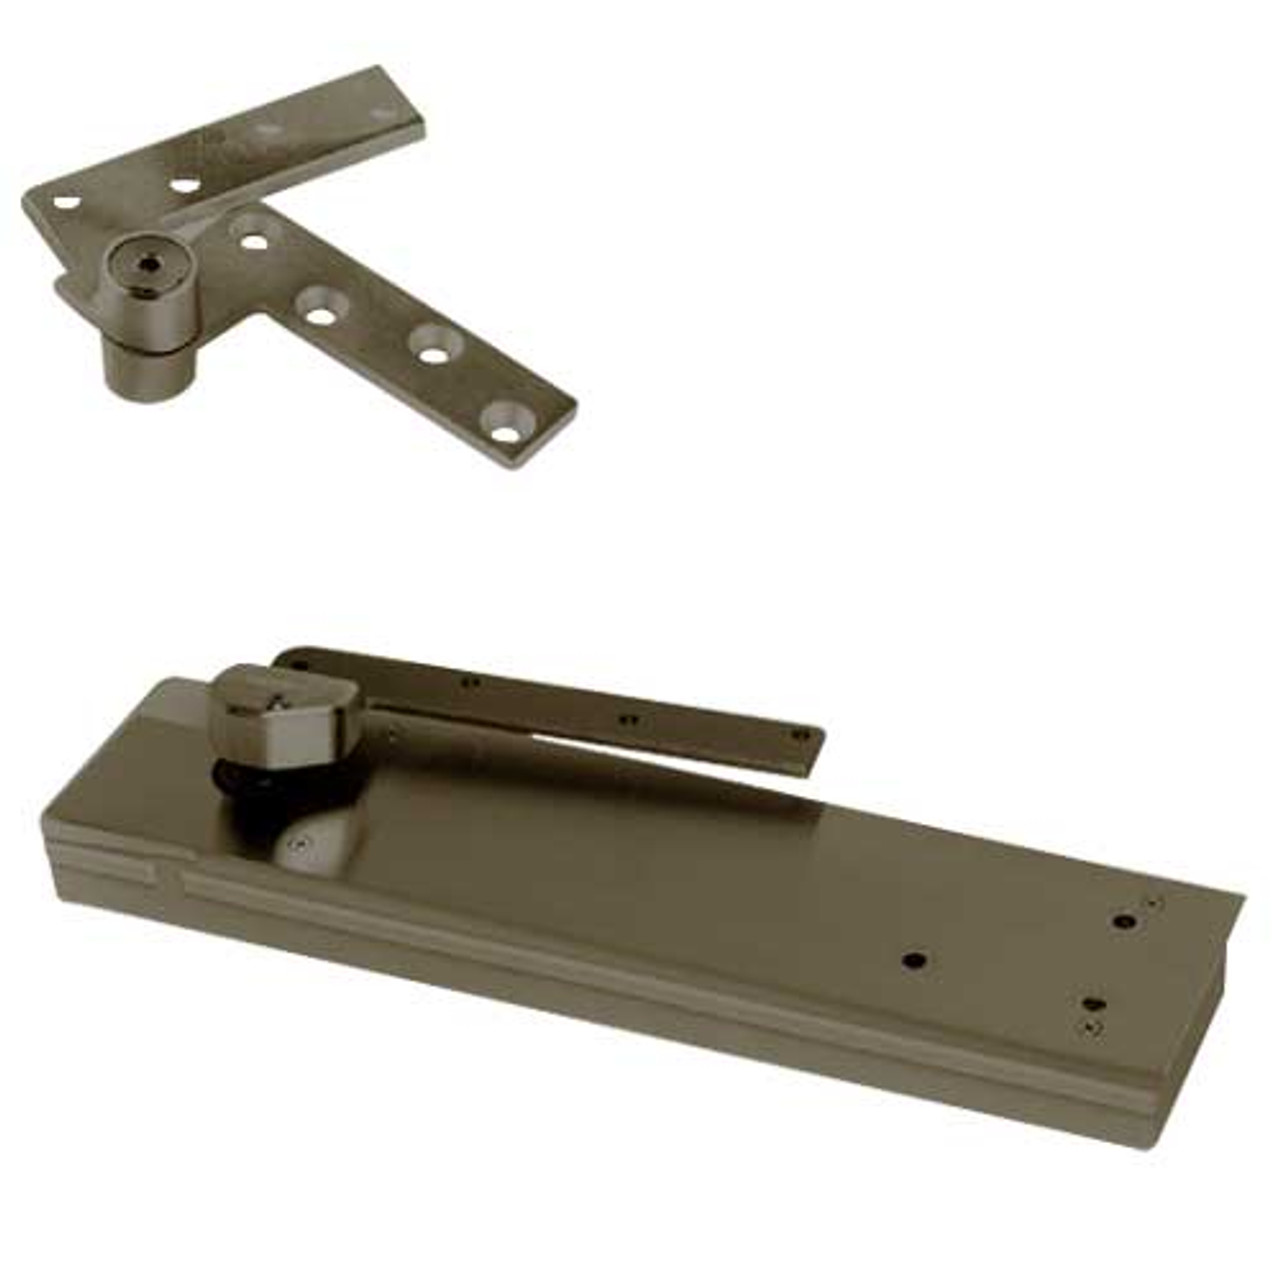 5103ABC105-1-1/2OS-LH-613 Rixson 51 Series 1-1/2" Offset Hung Shallow Depth Floor Closers in Dark Bronze Finish